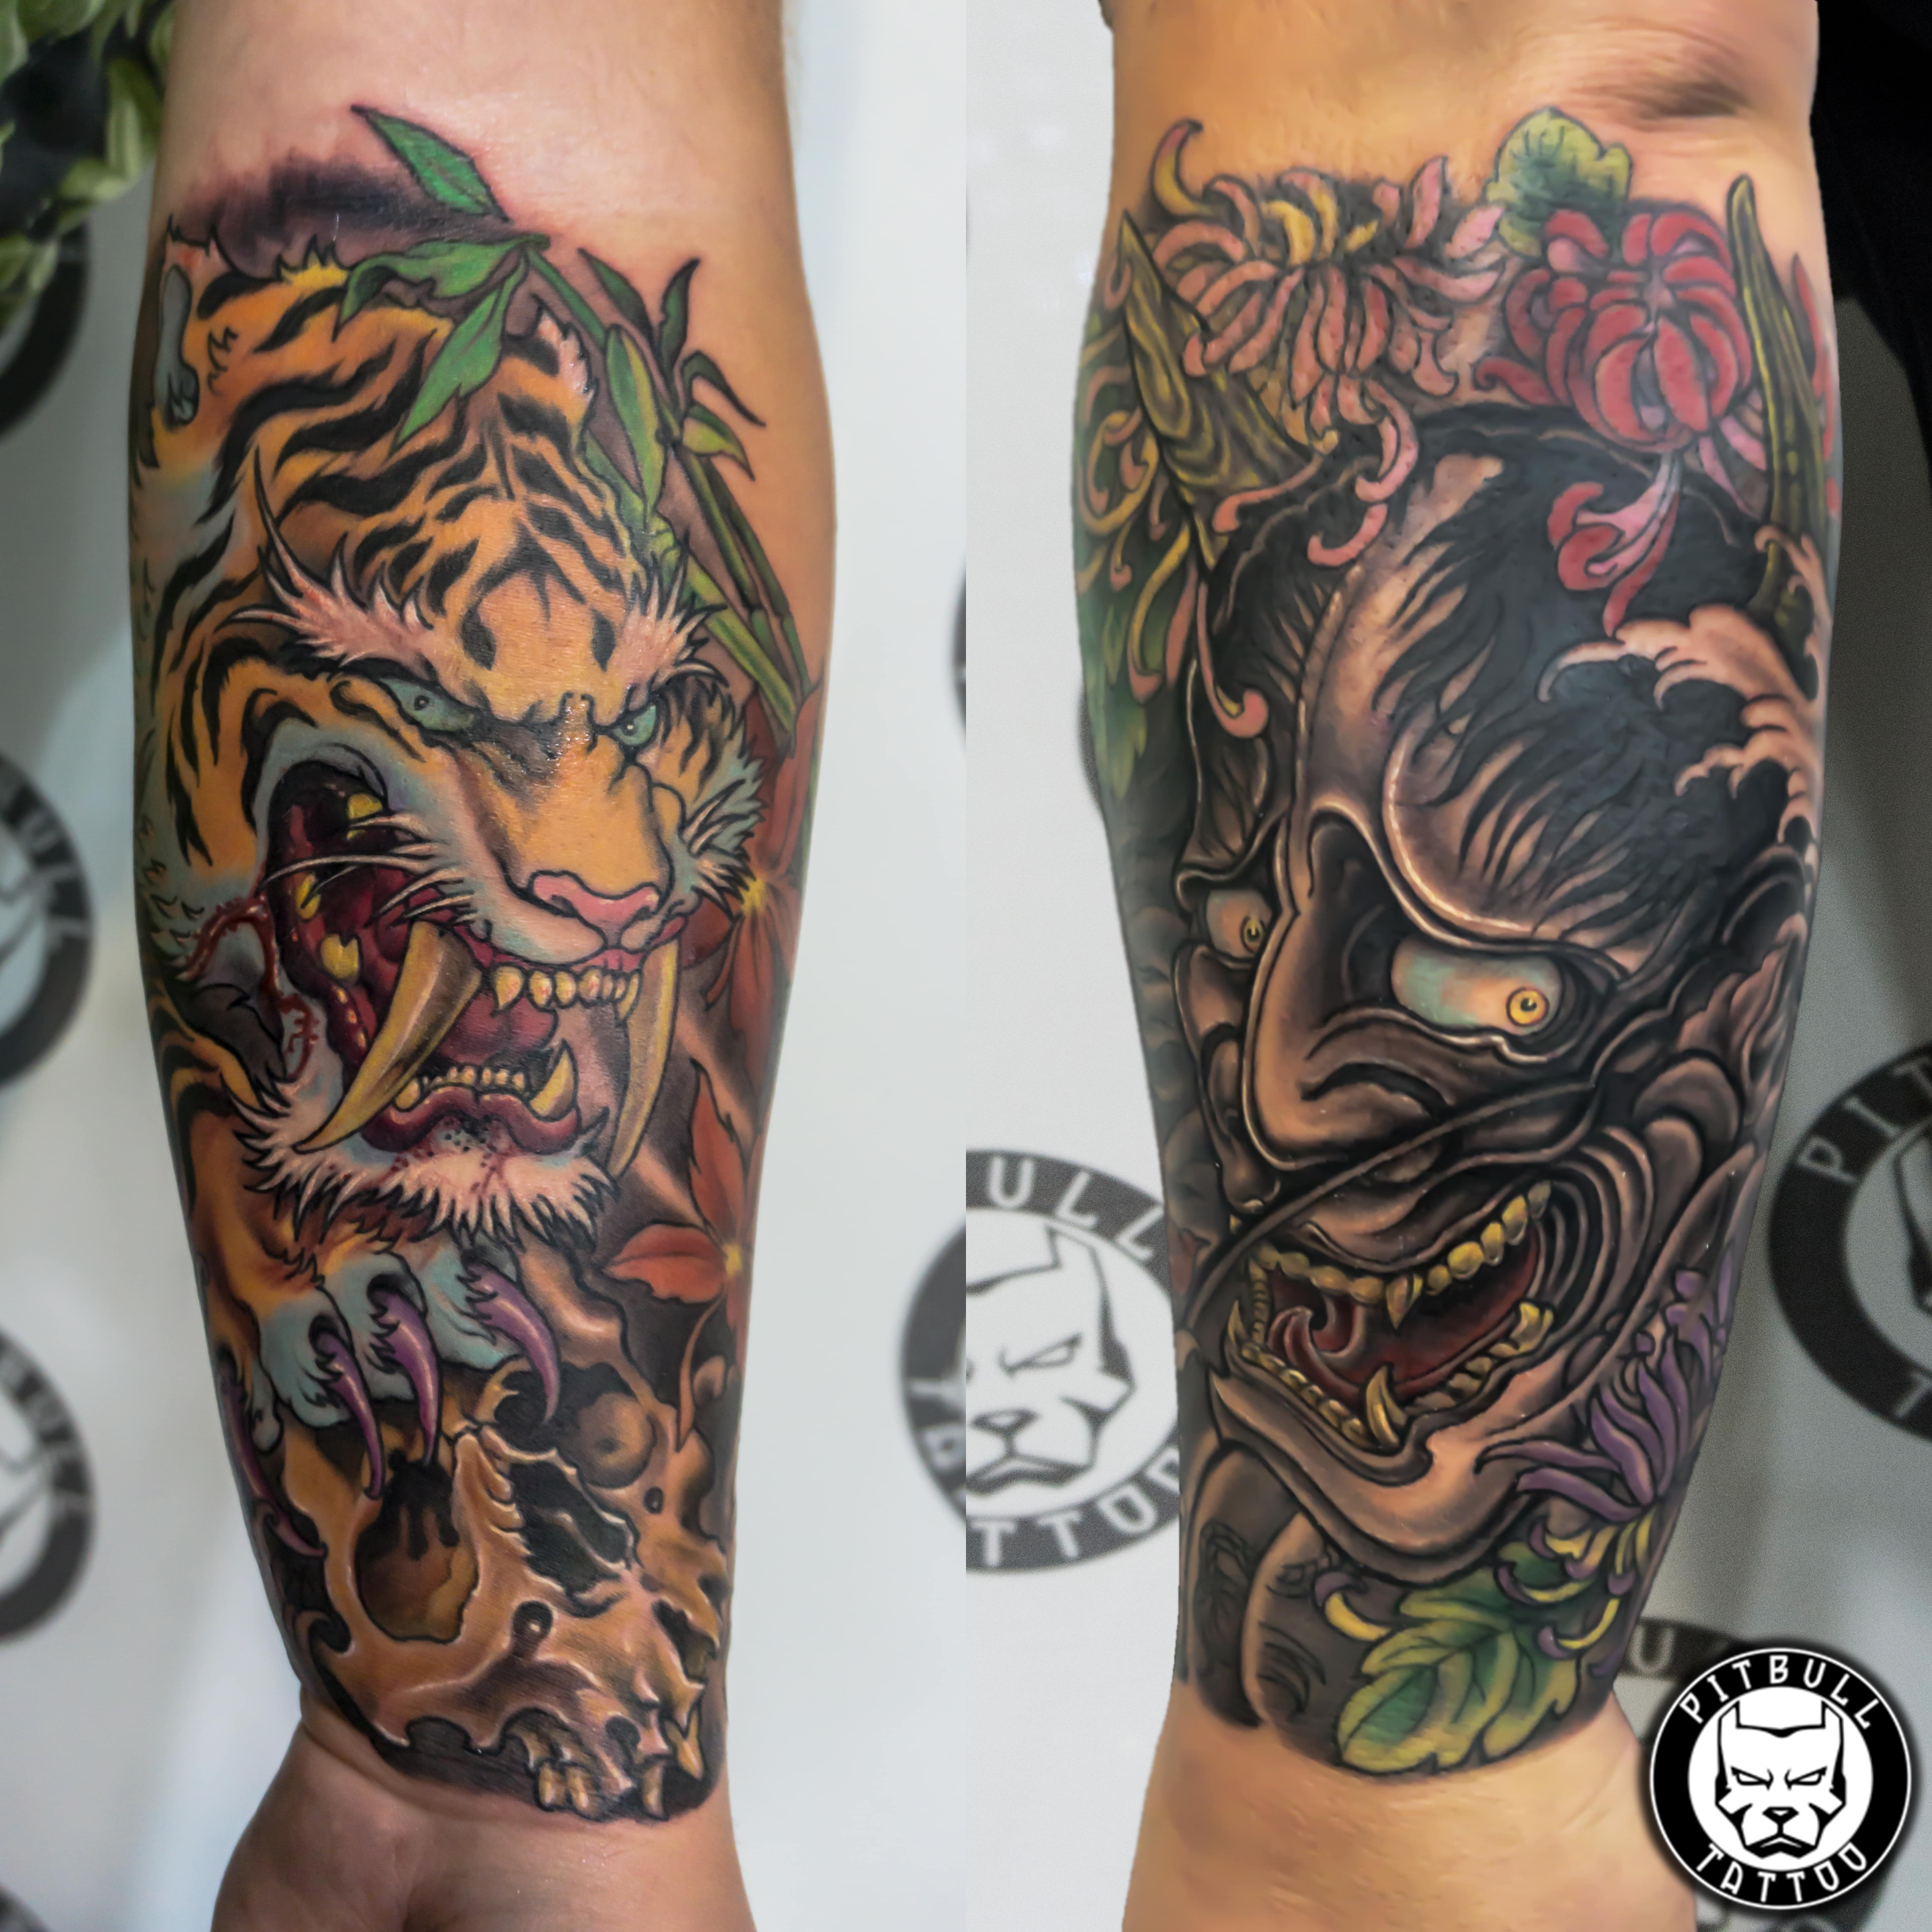 Schedule online with Pitbull Tattoo Thailand on 